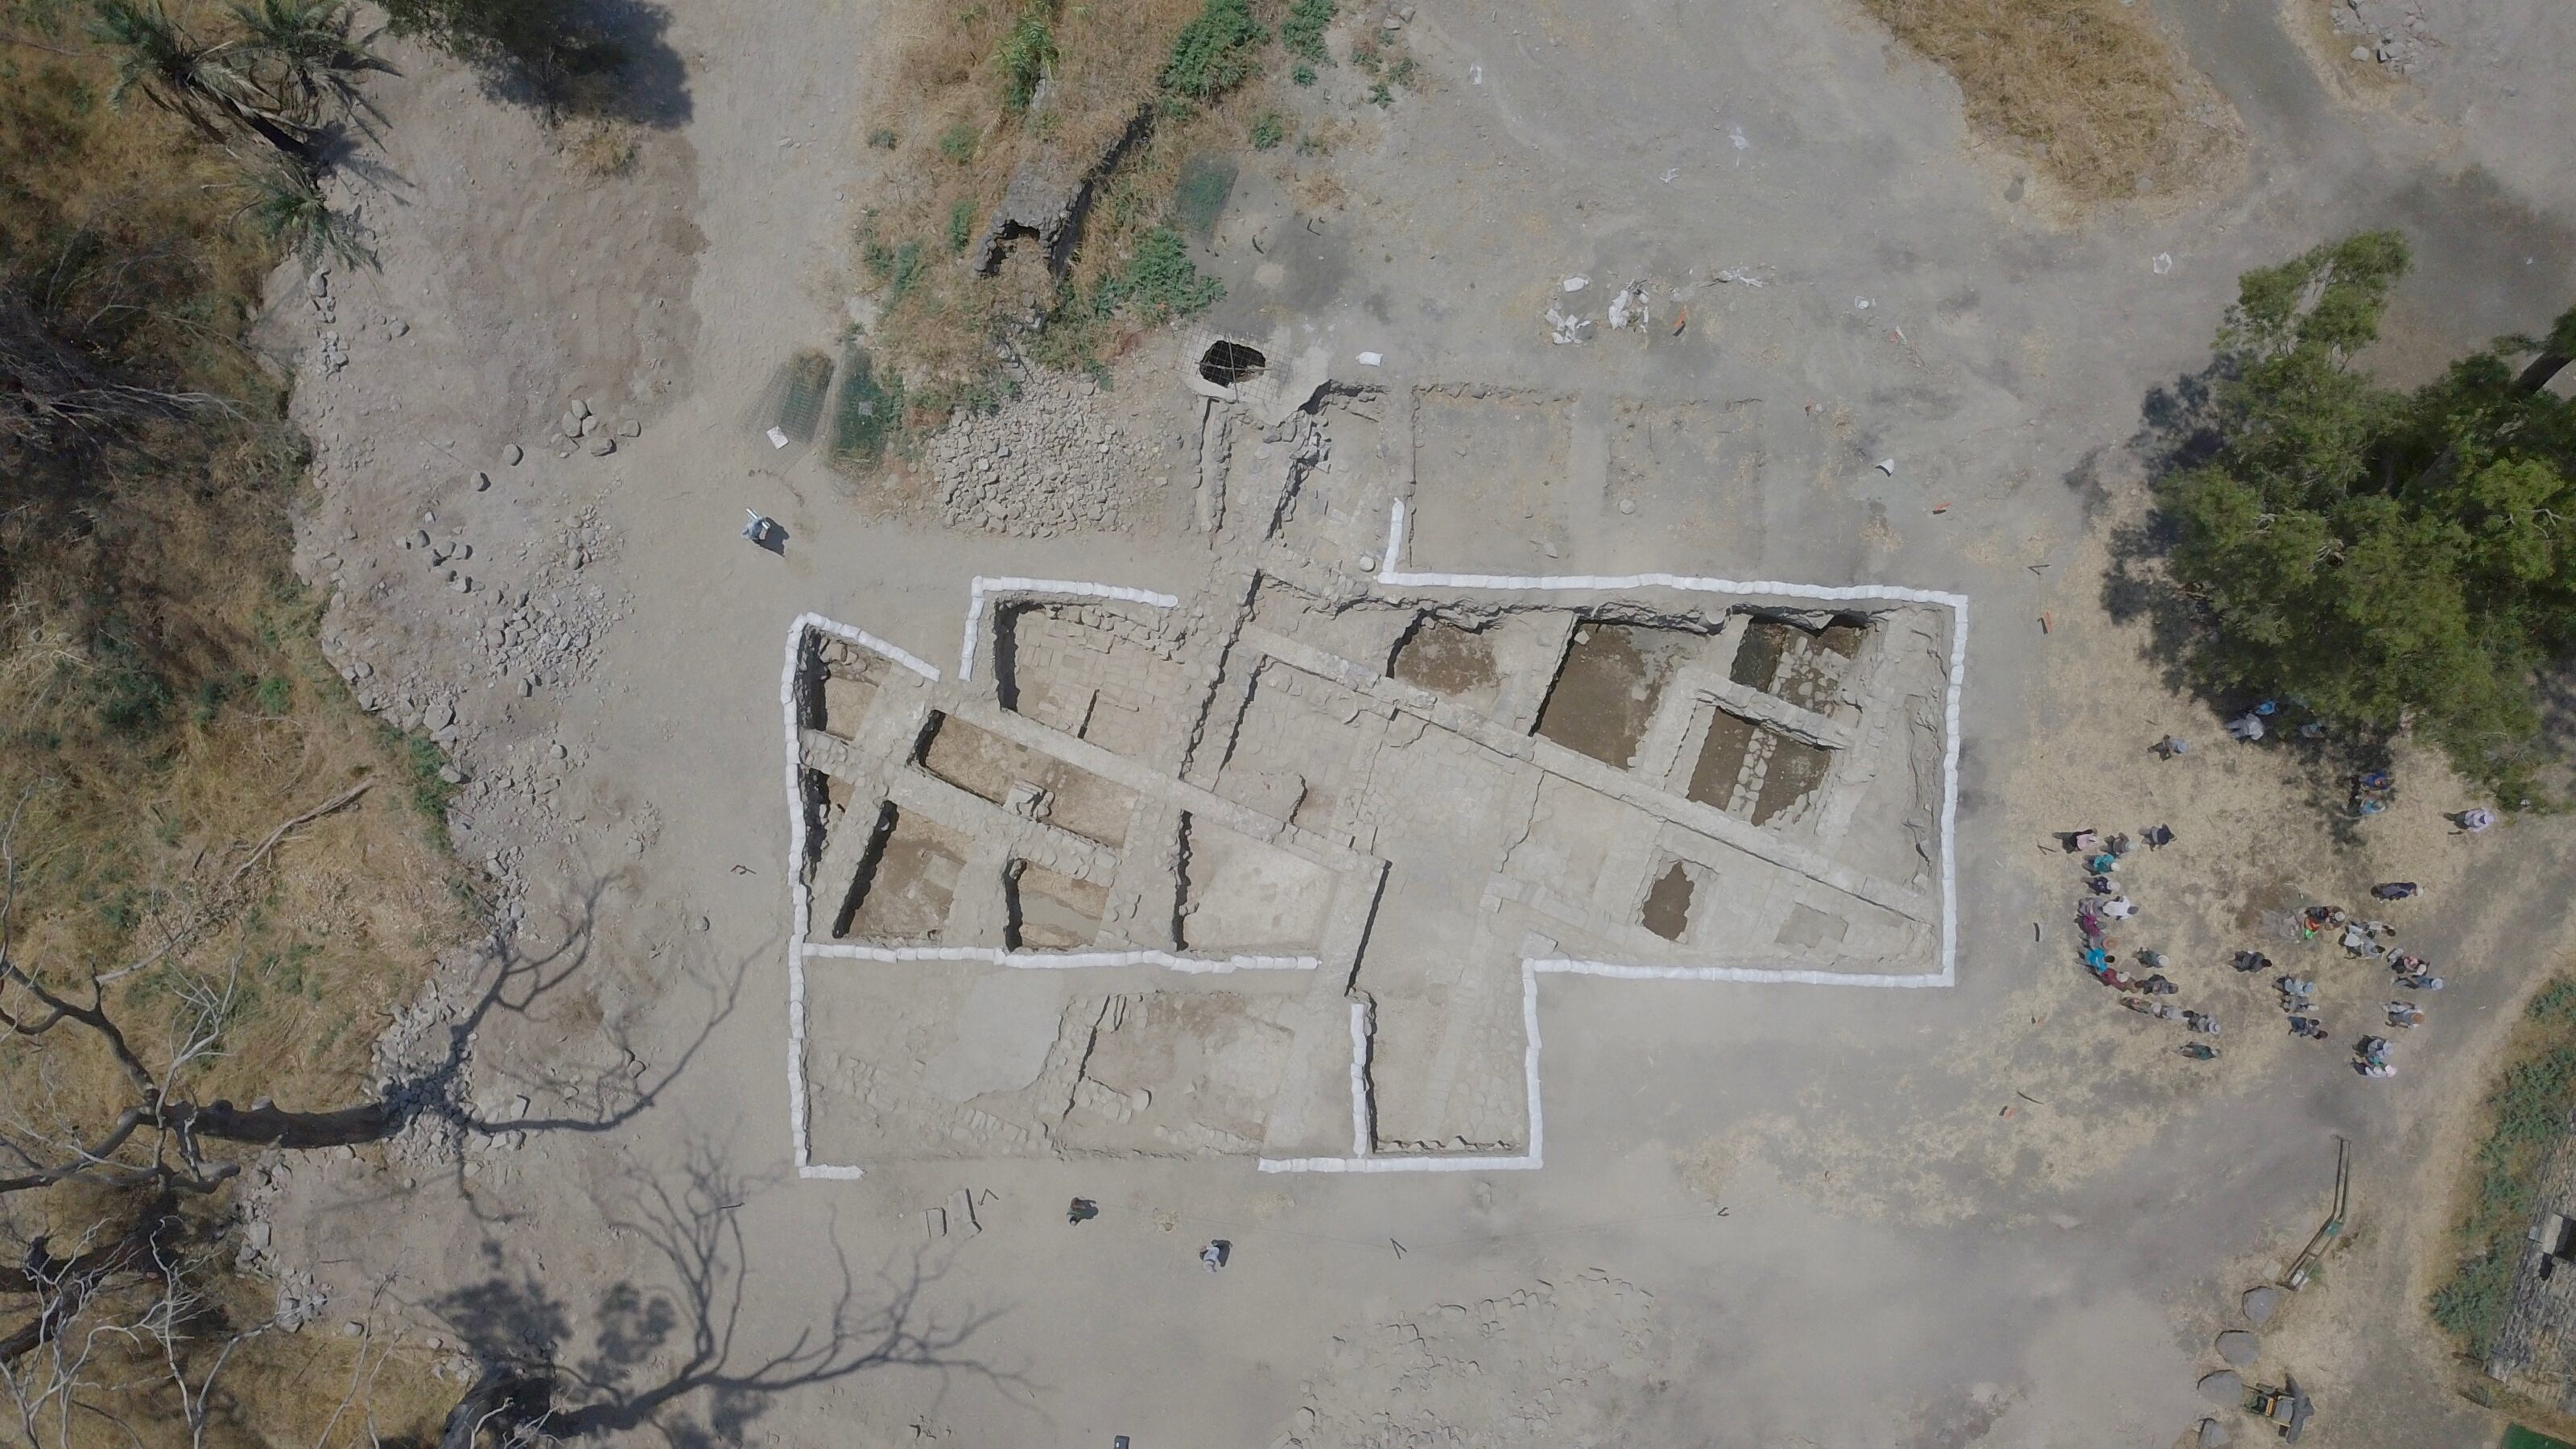 Church of the Apostles discovered near Sea of Galilee, archaeologists say | Fox News